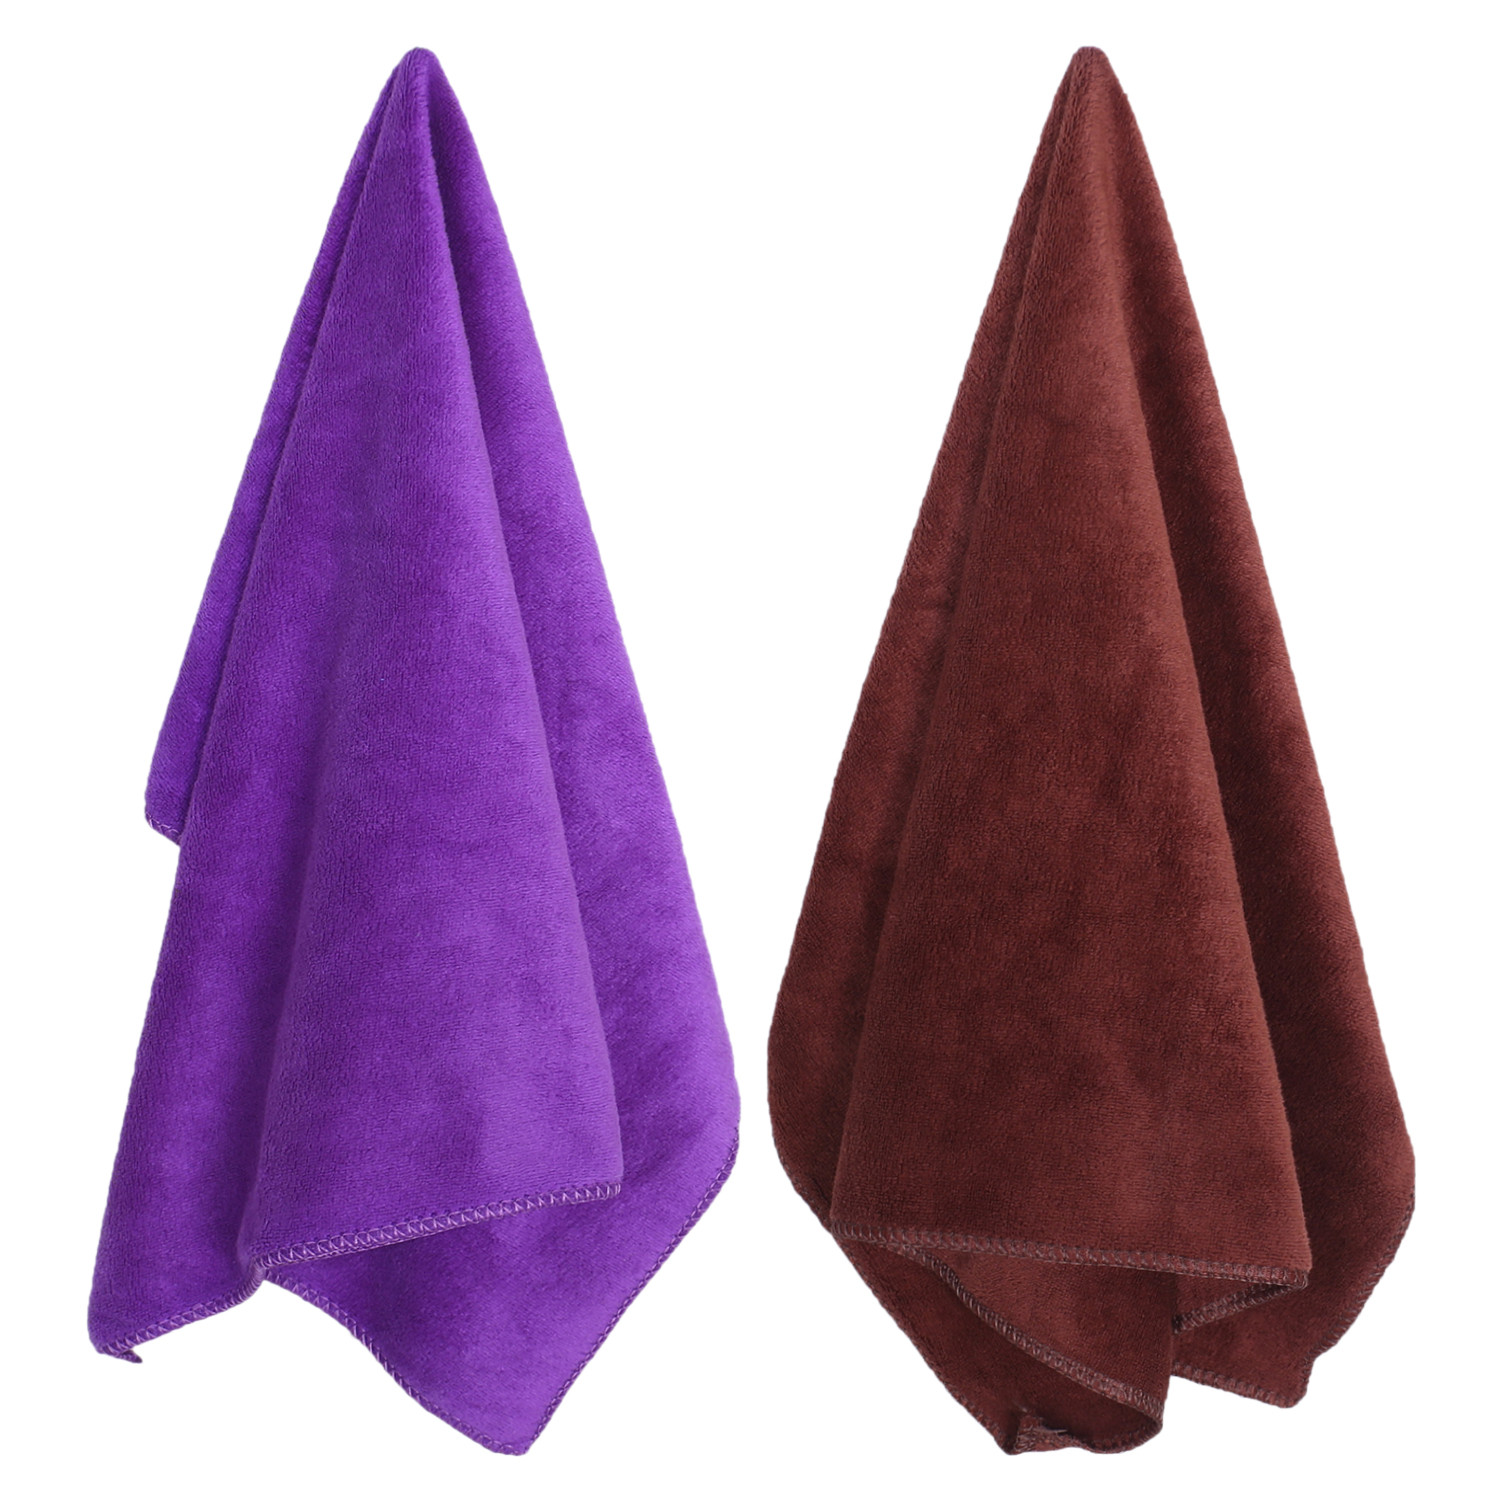 Kuber Industries Cleaning Cloths|Microfiber Highly Absorbent Wash Towels for Kitchen,Car,Window,24 x 16 Inch,Pack of 2 (Purple & Brown)